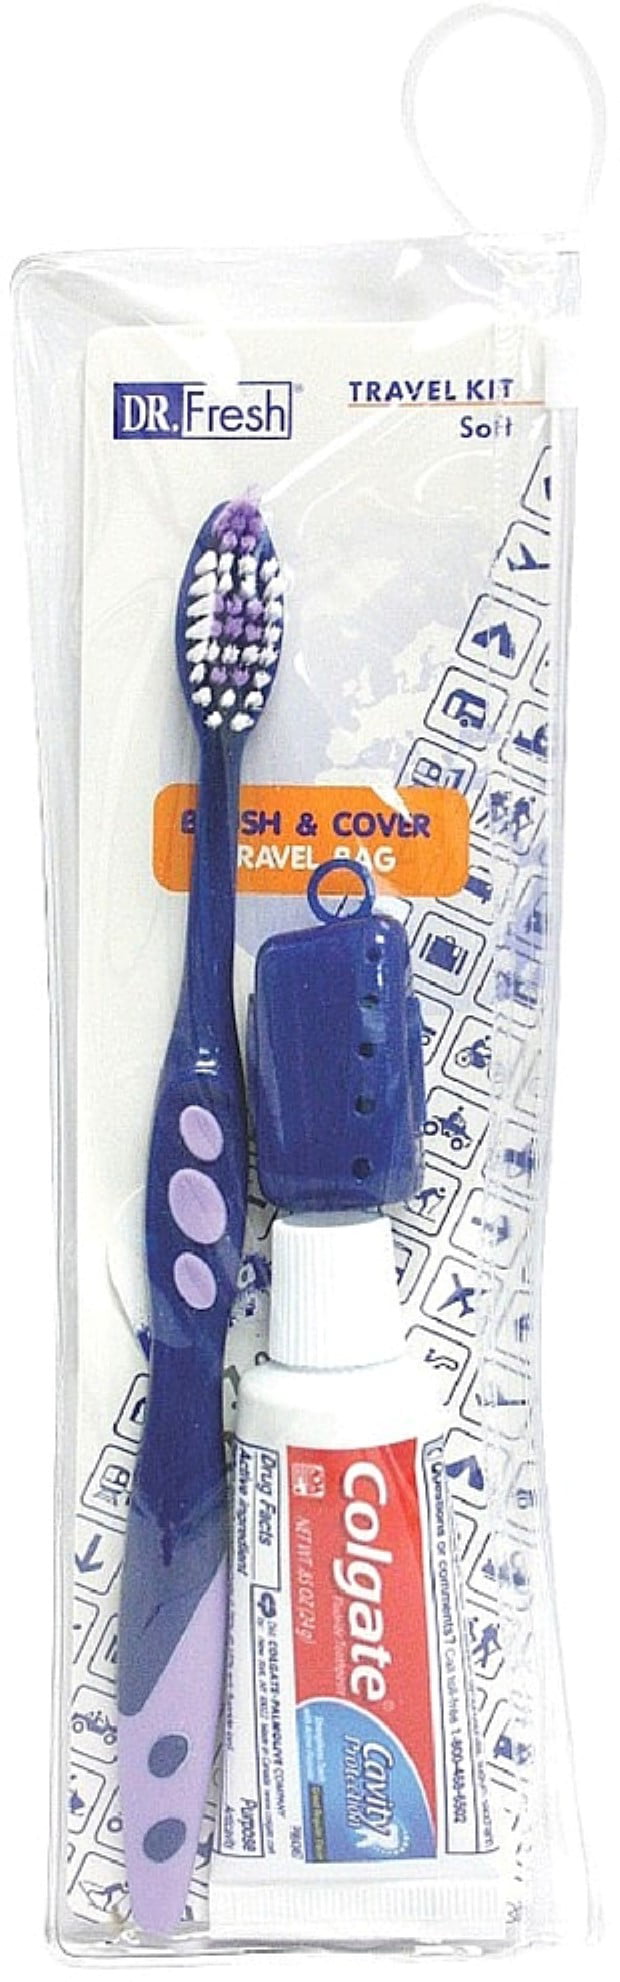 toothbrush travel kit for sale